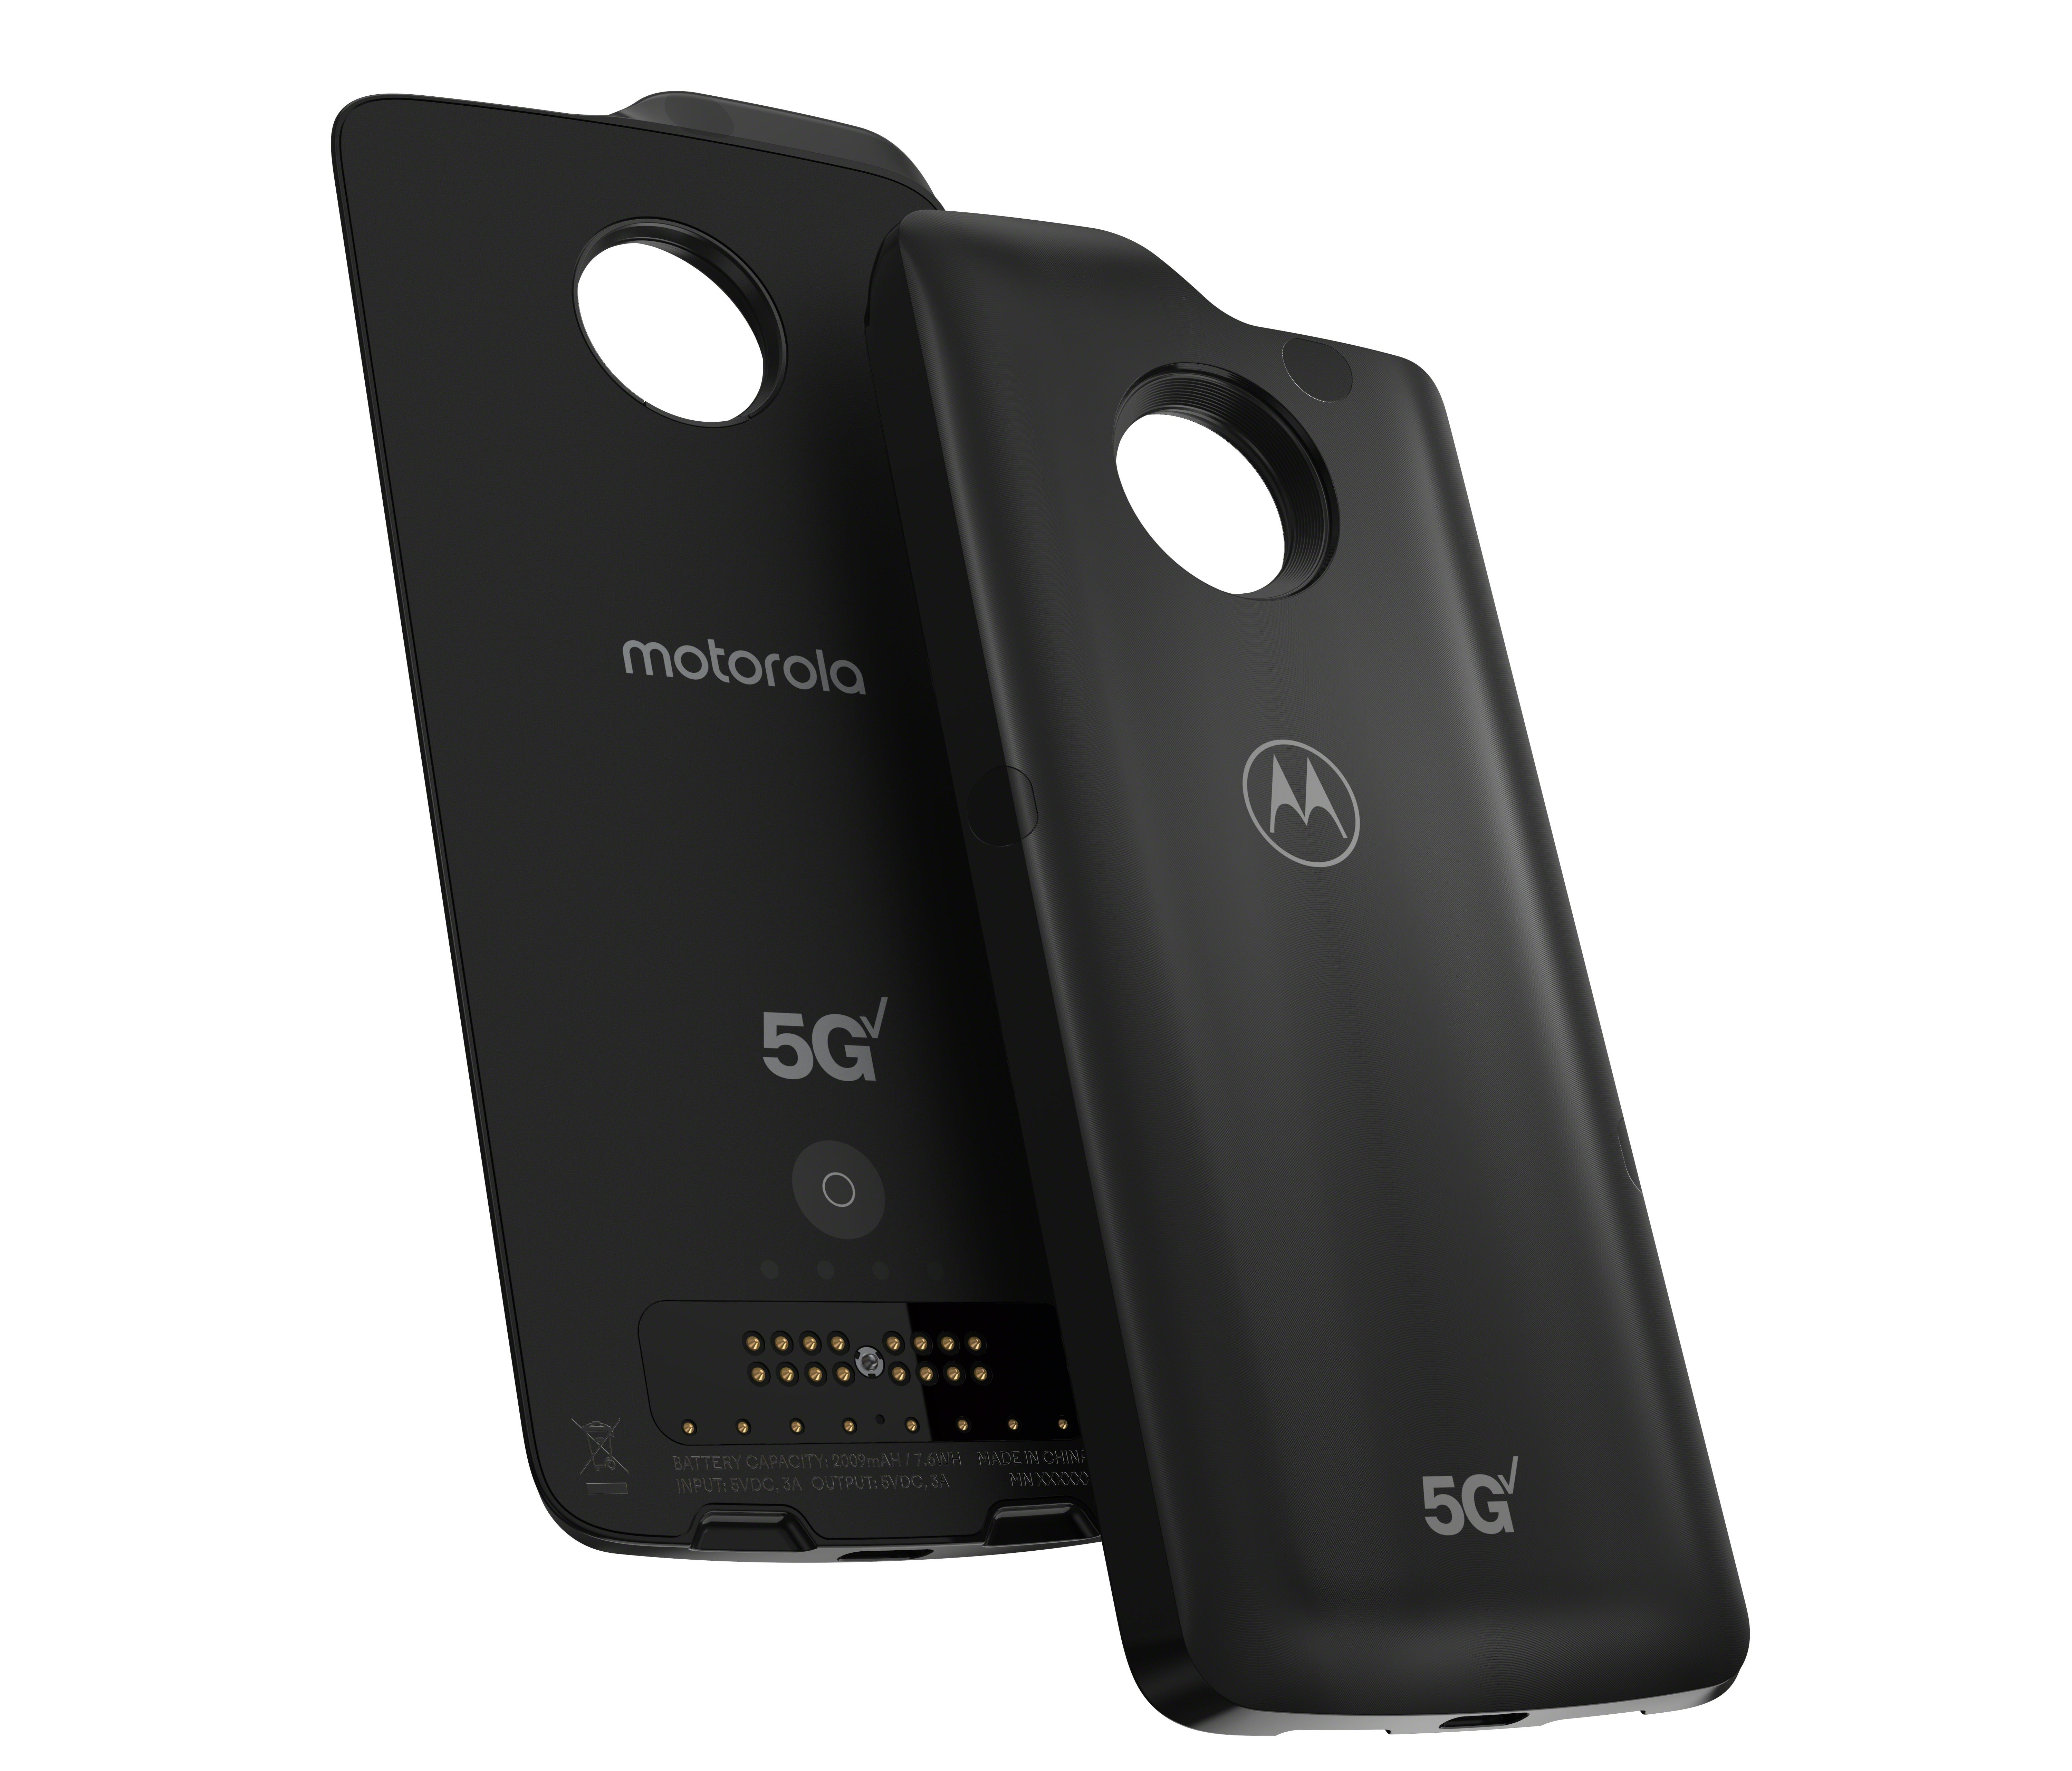 This 5G Moto Mod promises to turn Motorola's Z3 smartphone into a 5G-capable phone.